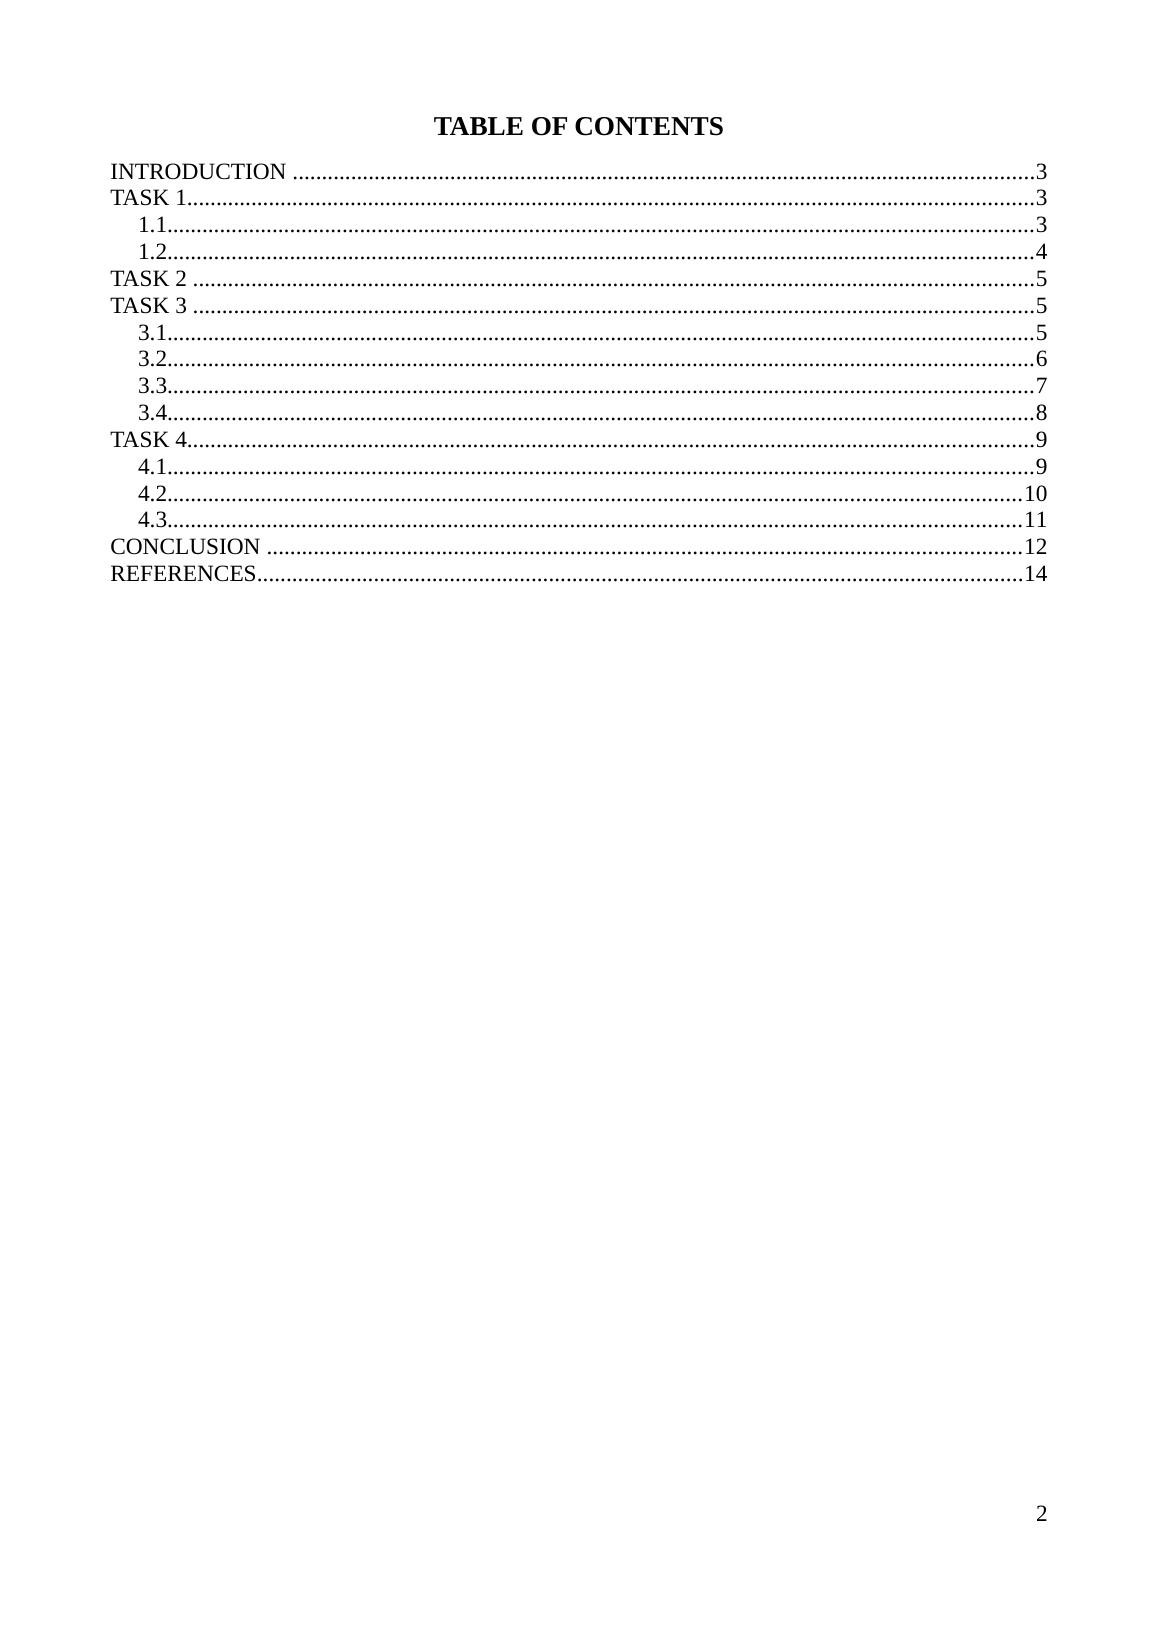 MARKETING PRNCIPLES TABLE OF CONTENTS_2